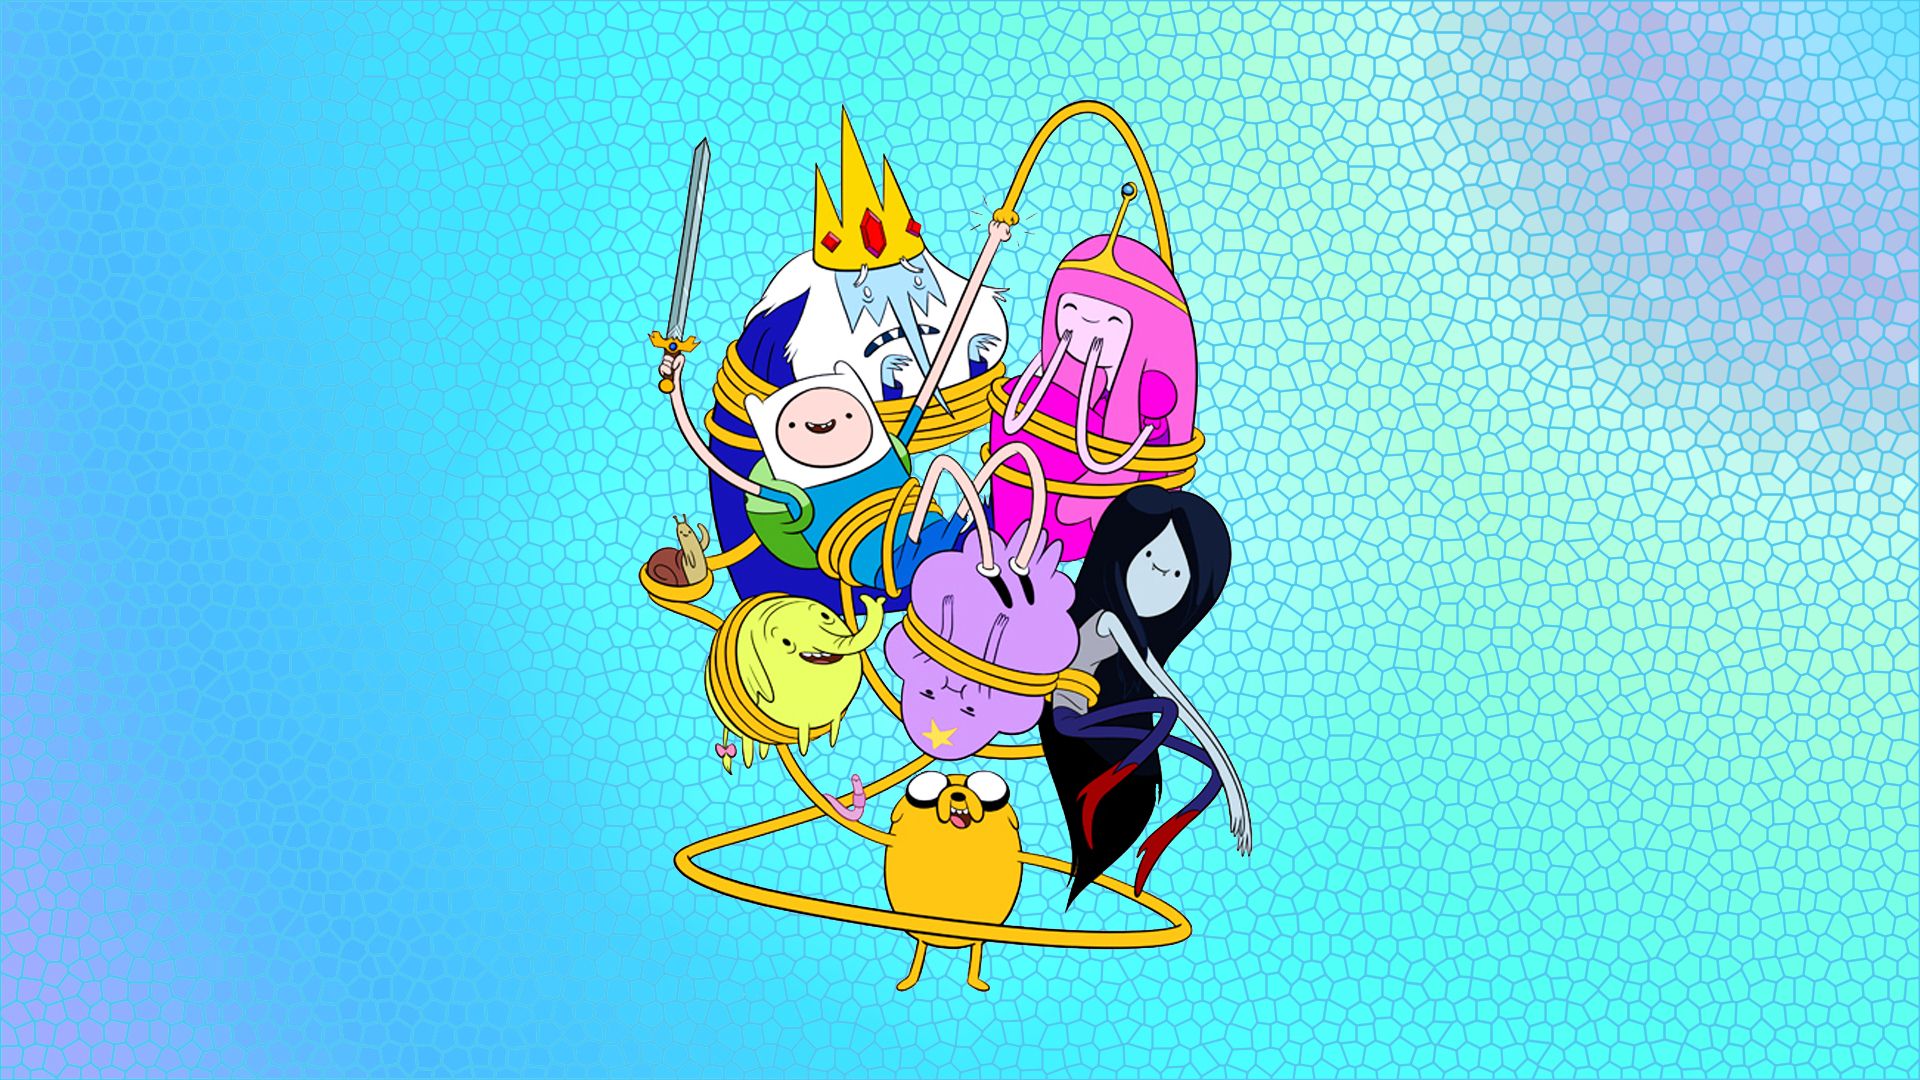 Free Download Adventure Time Wallpaper Hd Wallpaper High Definition High Quality 19x1080 For Your Desktop Mobile Tablet Explore 47 Adventure Time Hd Wallpaper Adventure Time Iphone Wallpaper Hd Jake